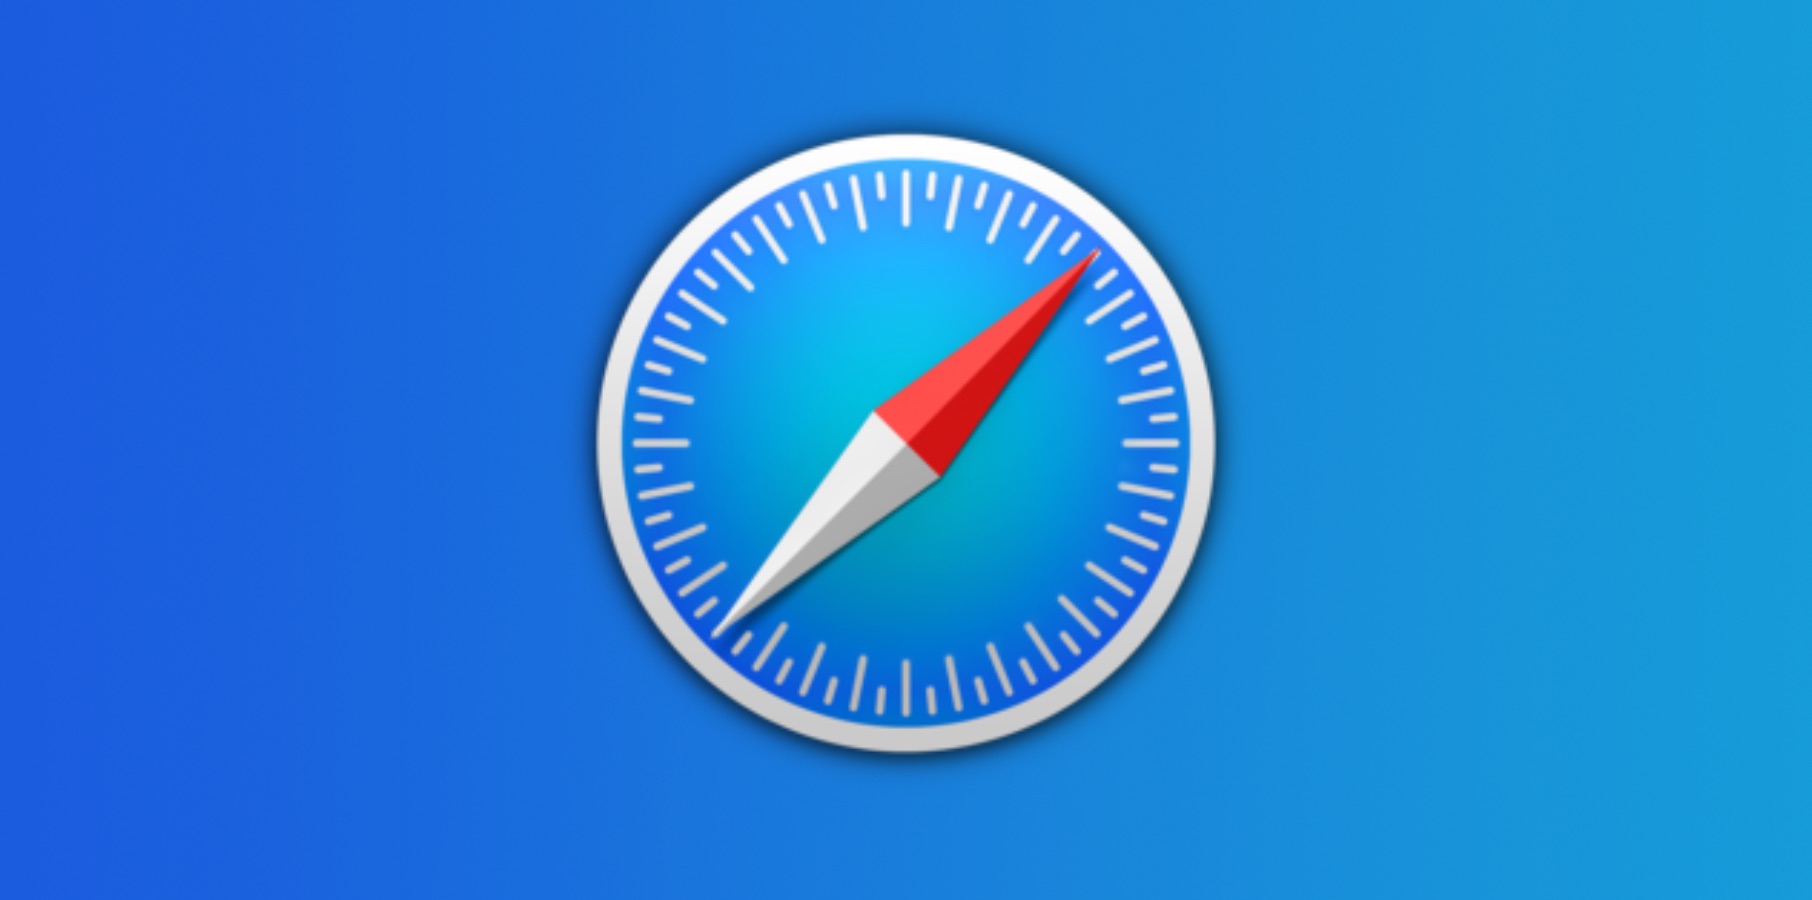 Safari retakes second place in global browser market share, but Edge is close behind